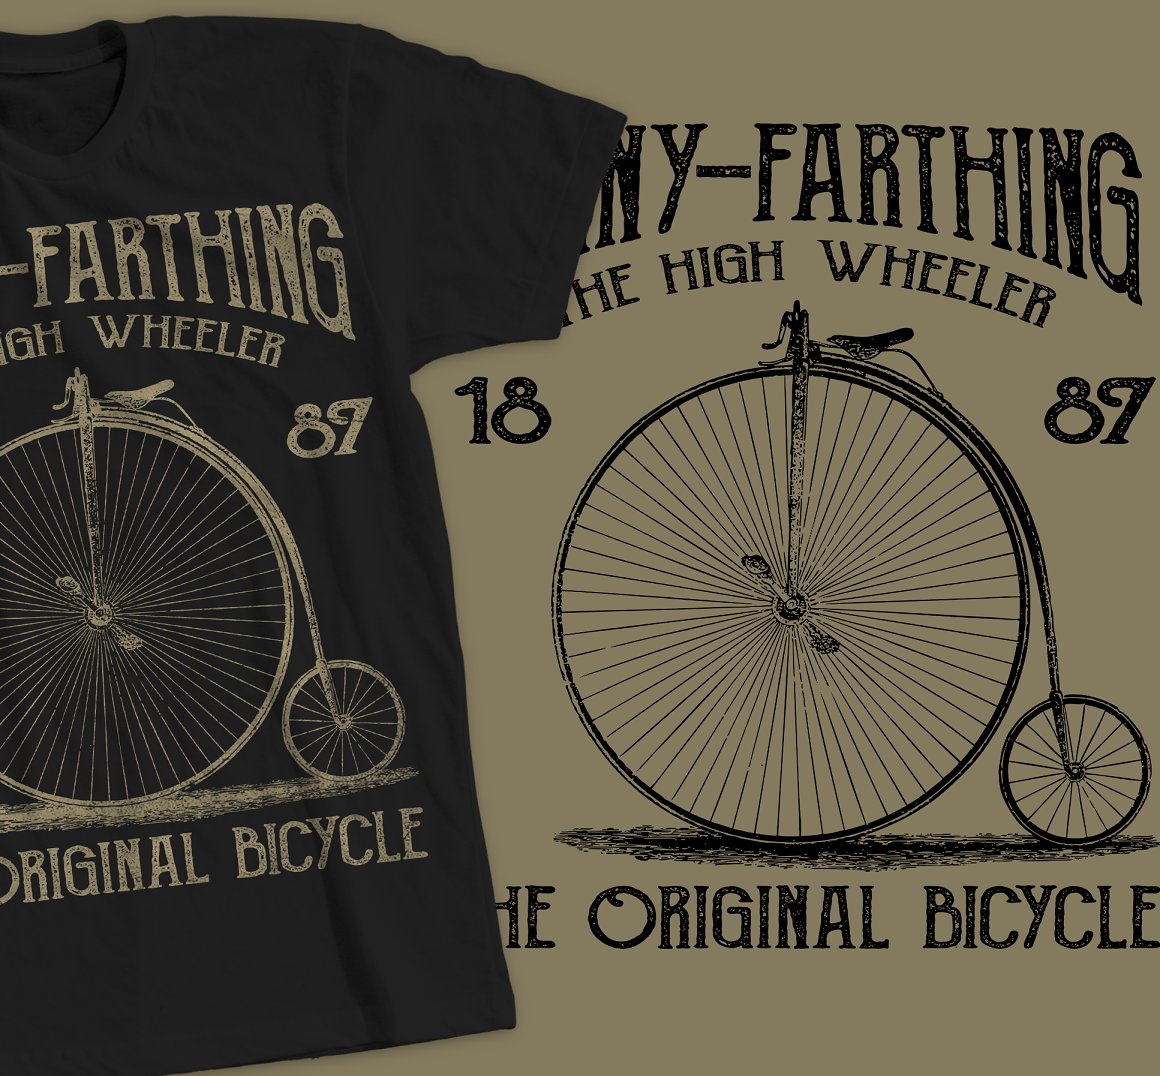 The black T-shirt with a image bicycle and the lettering "Penny-Farthing the high wheeler the original bicycle" Cover.